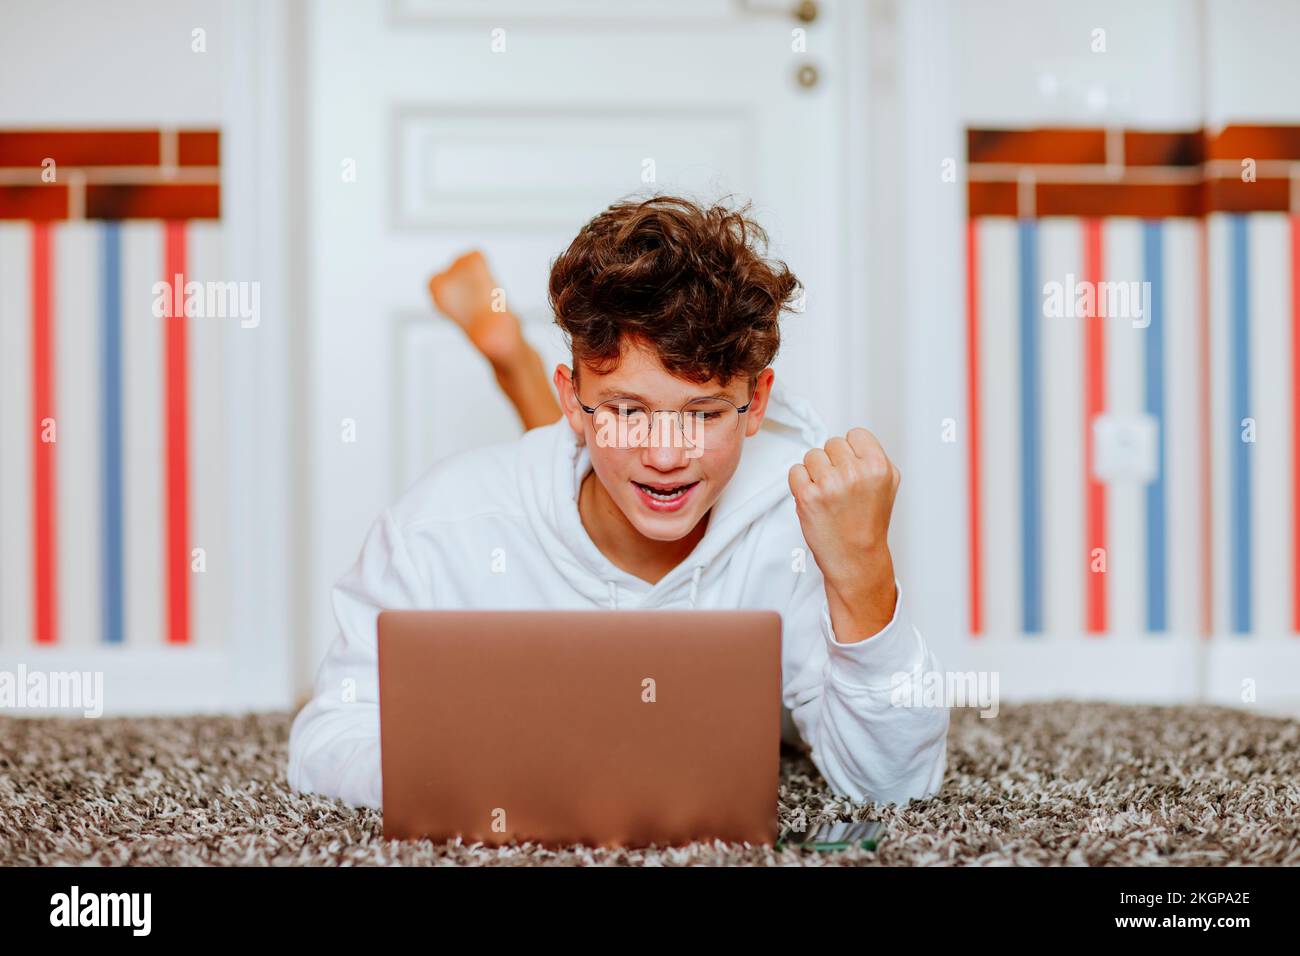 Happy boy gesturing fist looking at laptop Stock Photo